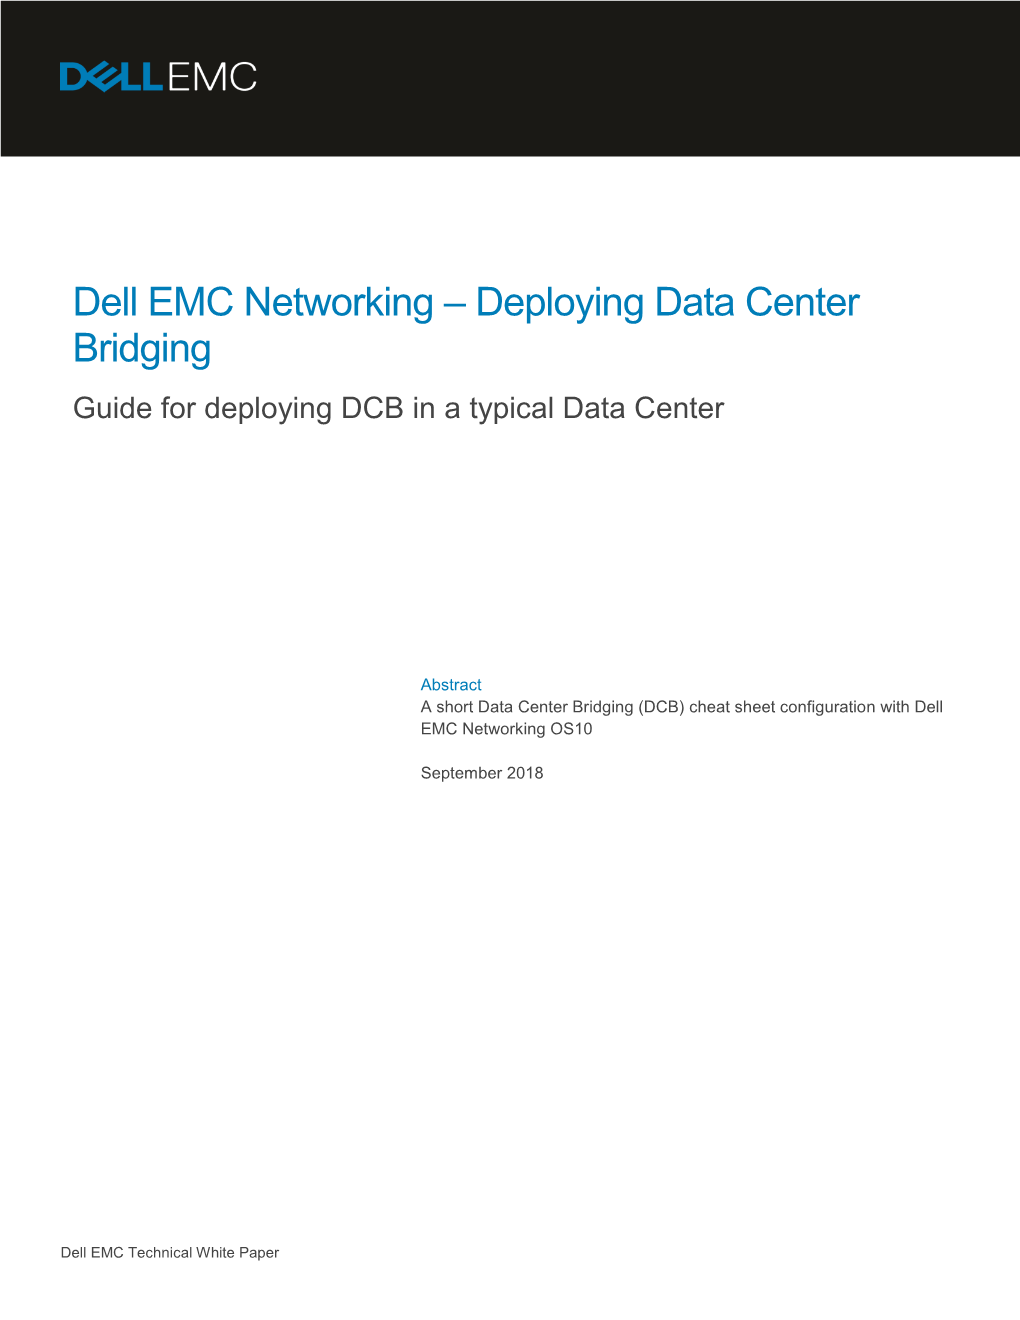 Dell EMC Networking – Deploying Data Center Bridging Guide for Deploying DCB in a Typical Data Center